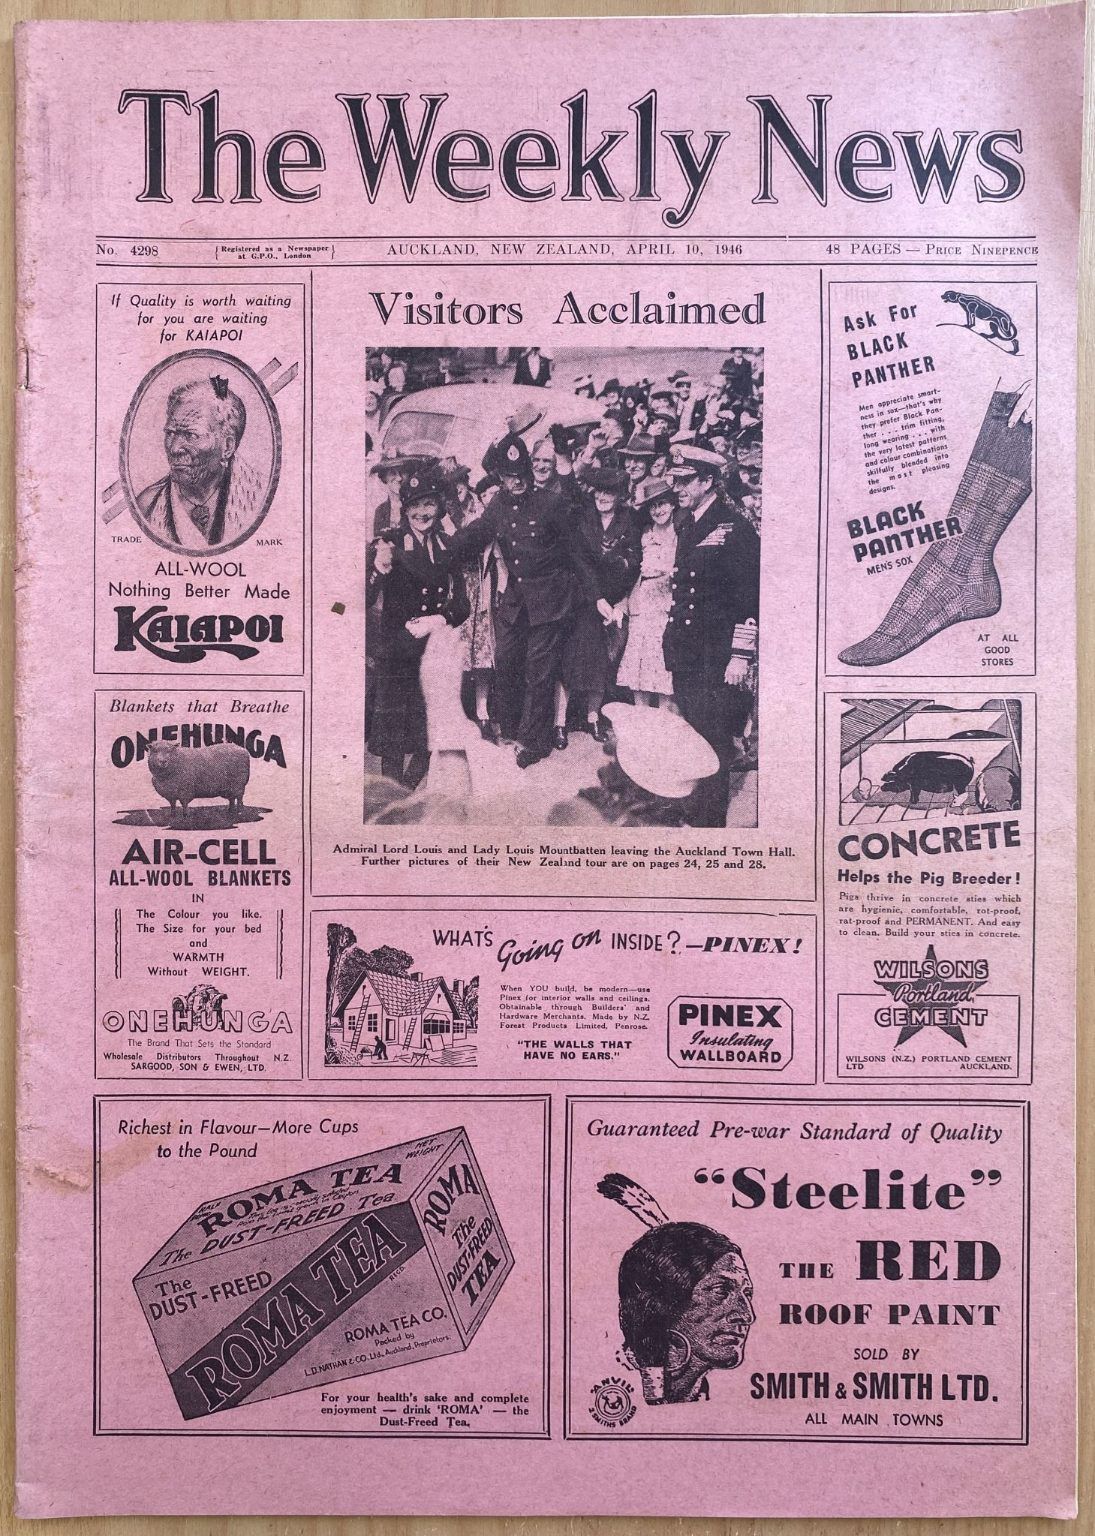 OLD NEWSPAPER: The Weekly News - No. 4298, 10 April 1946